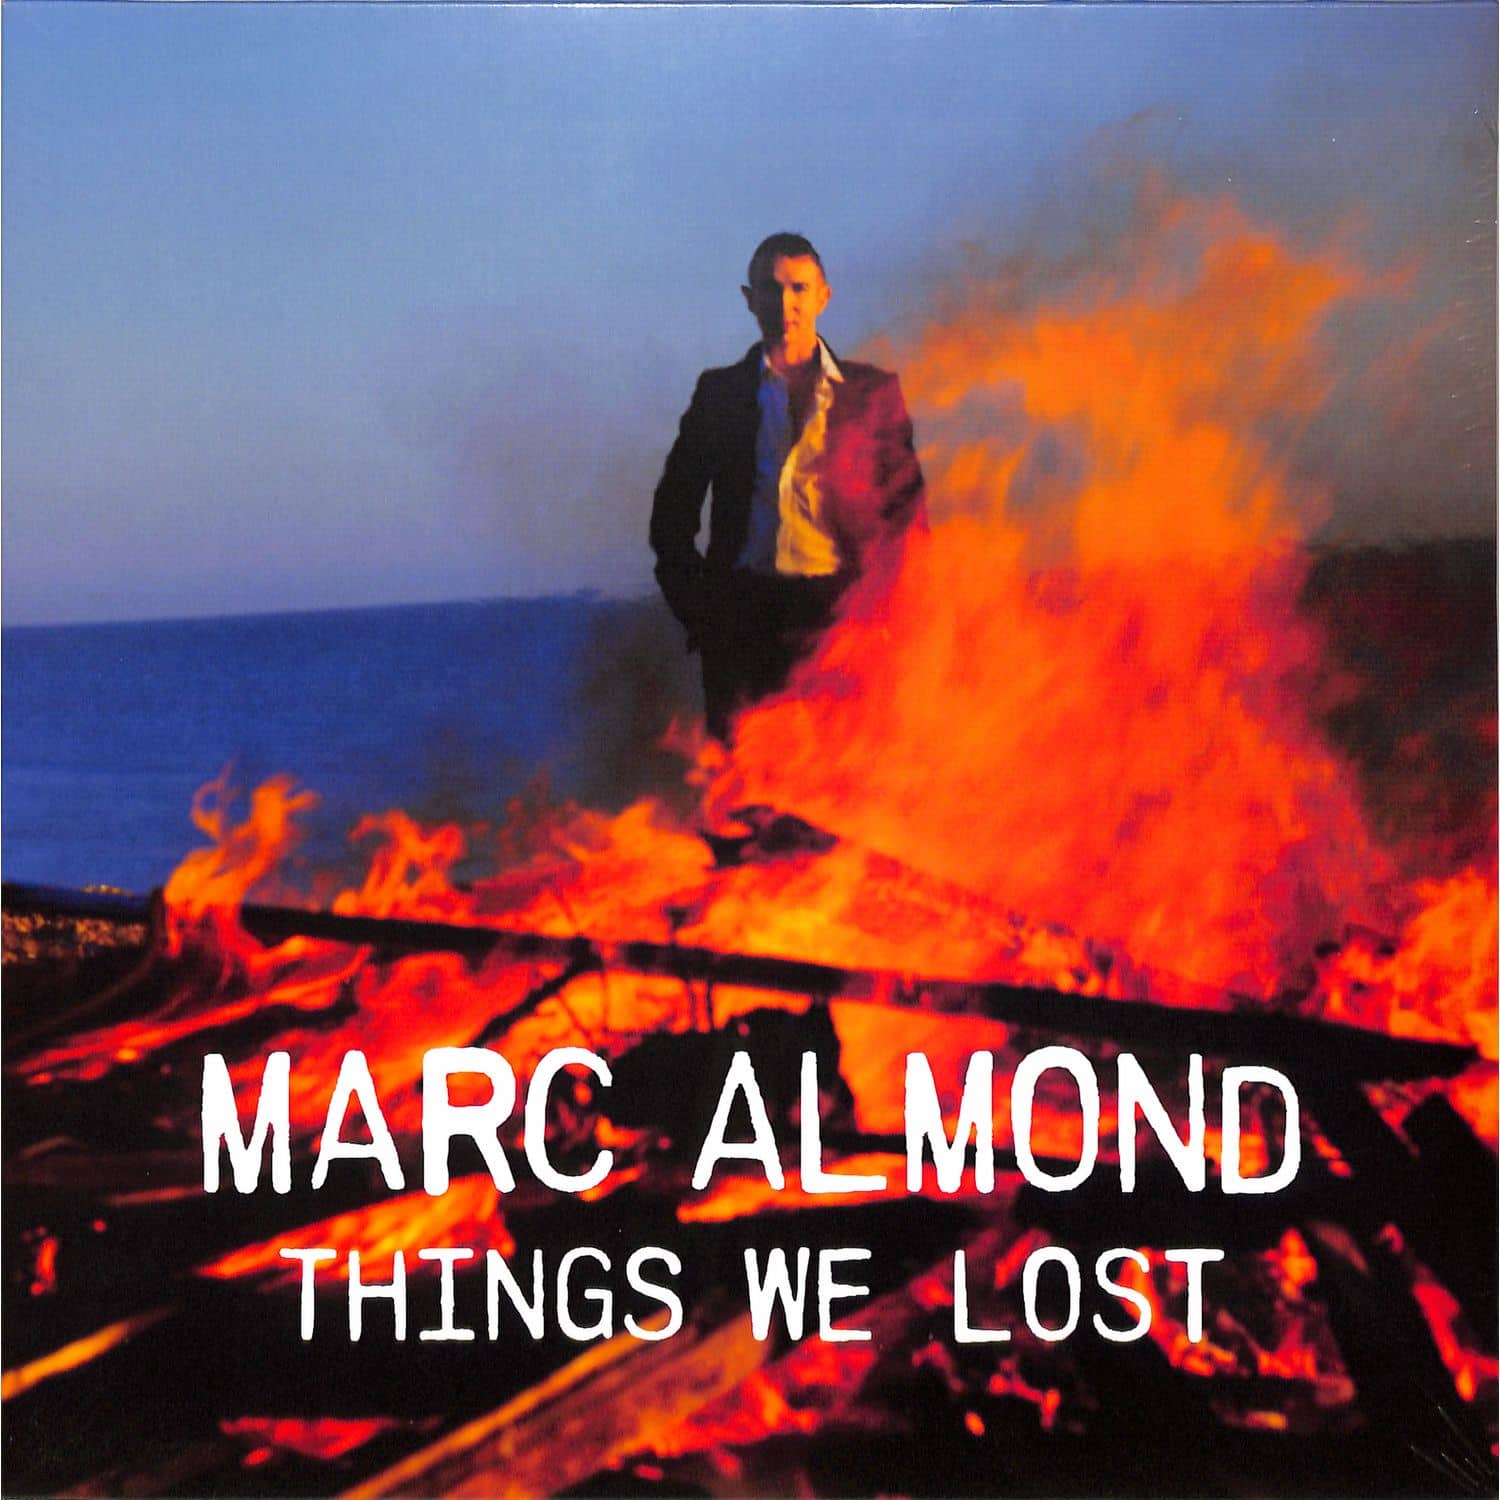 Marc Almond - THE THINGS WE LOST 